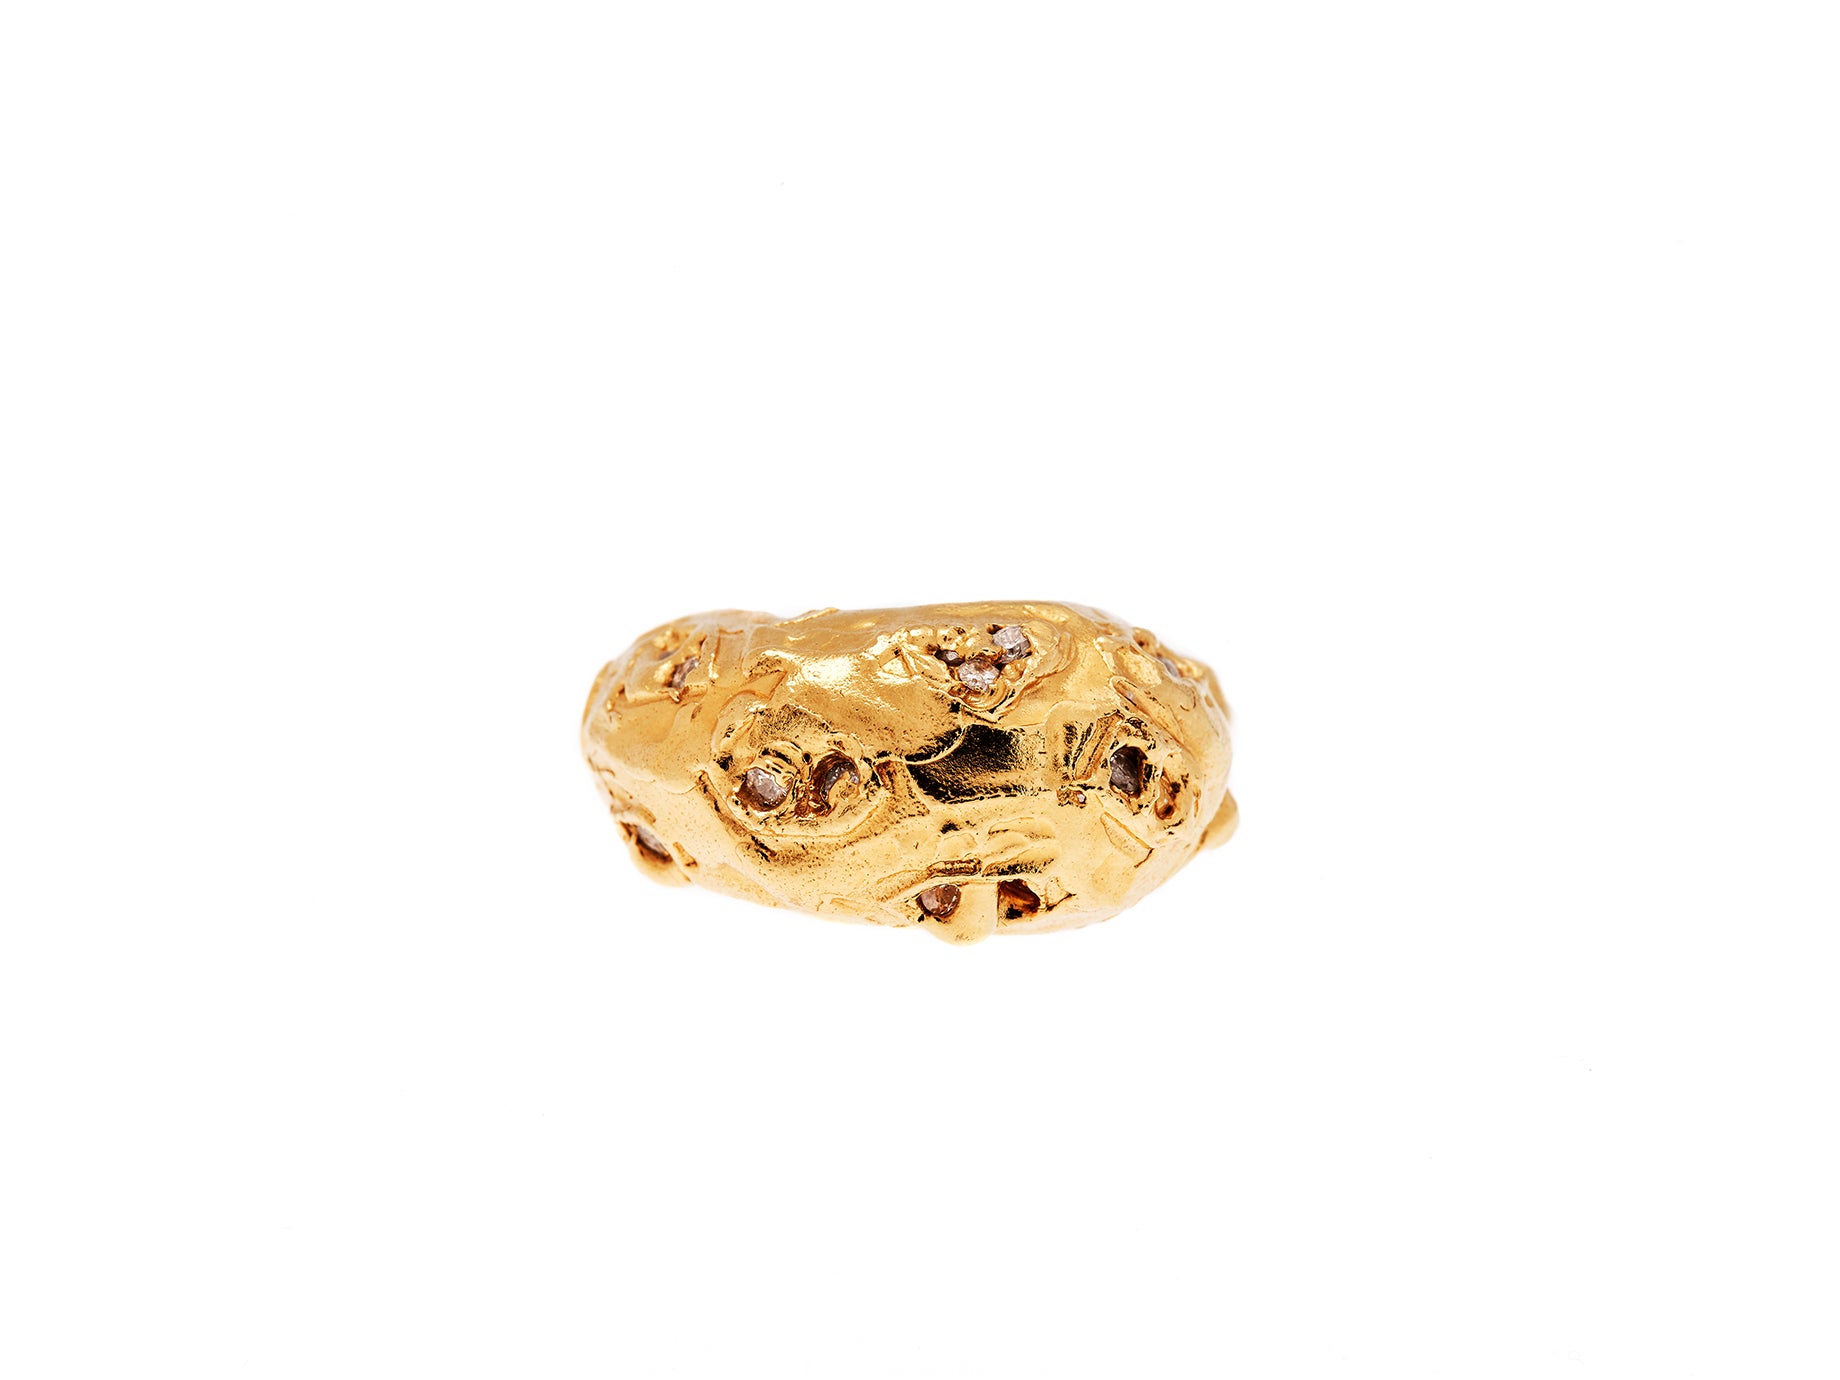 The Coded Diamonds Ring